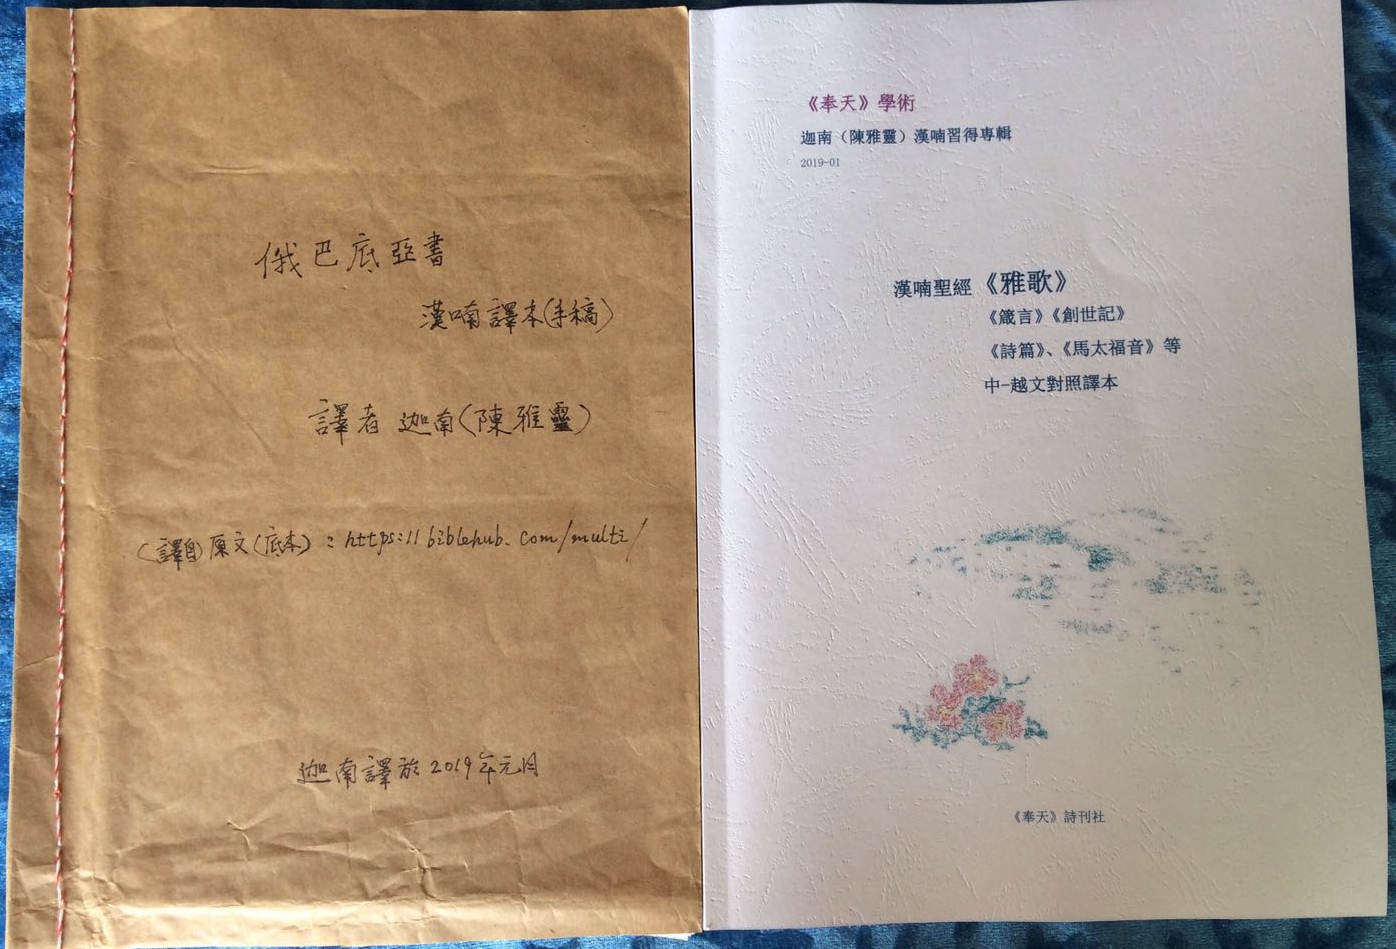 The Sino-Vietnamese and Chinese Contrast Bible translated by Chen Jianan, including Genesis, Psalms, Proverbs, Songs of songs, Matthew and Exodus